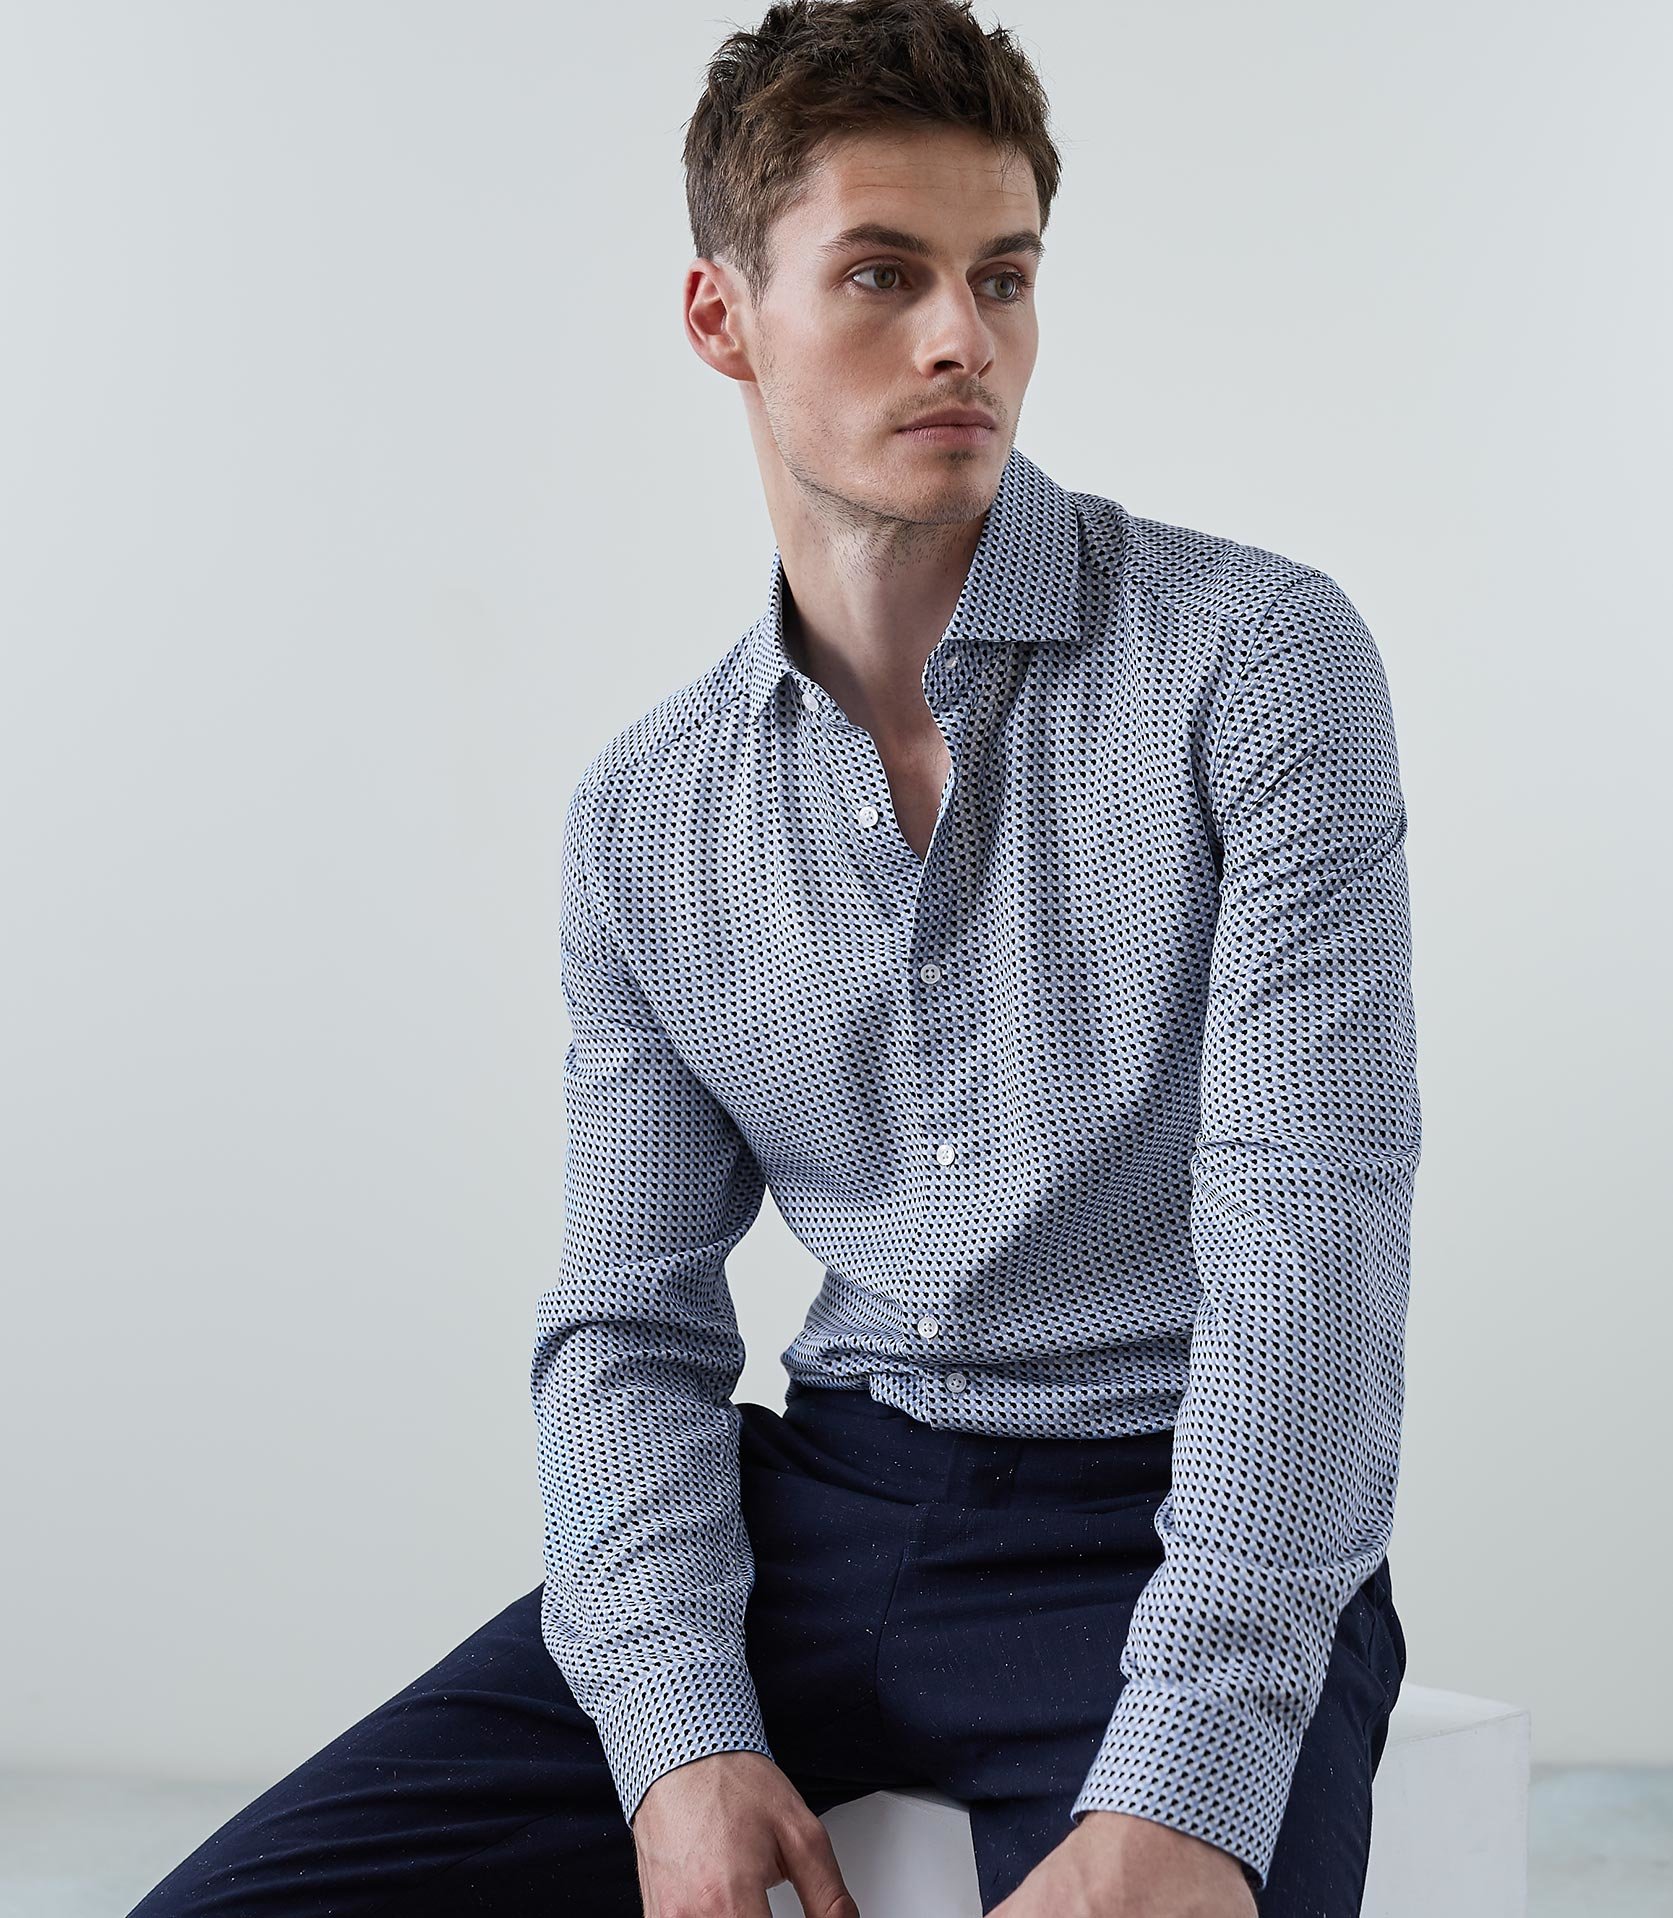 Men's Wardrobe Update: Our Top 10 New Arrivals For Him From Reiss ...